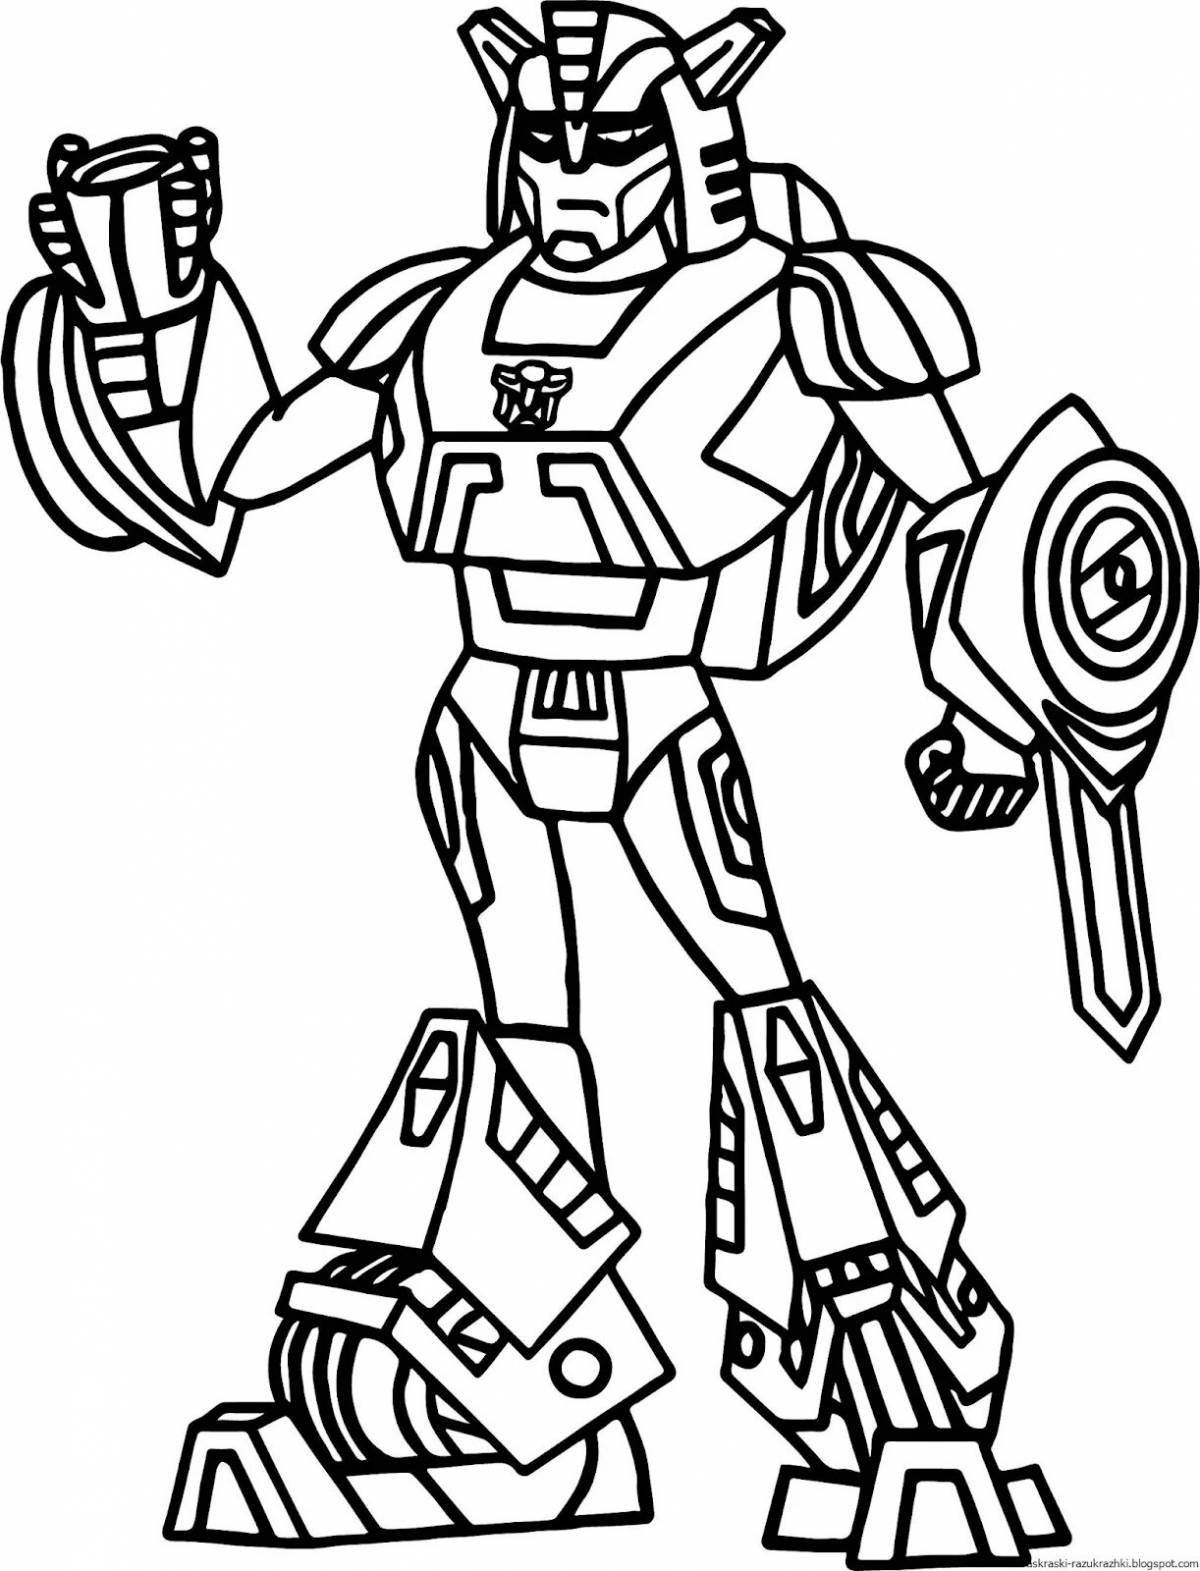 Color transforming robot coloring book for kids